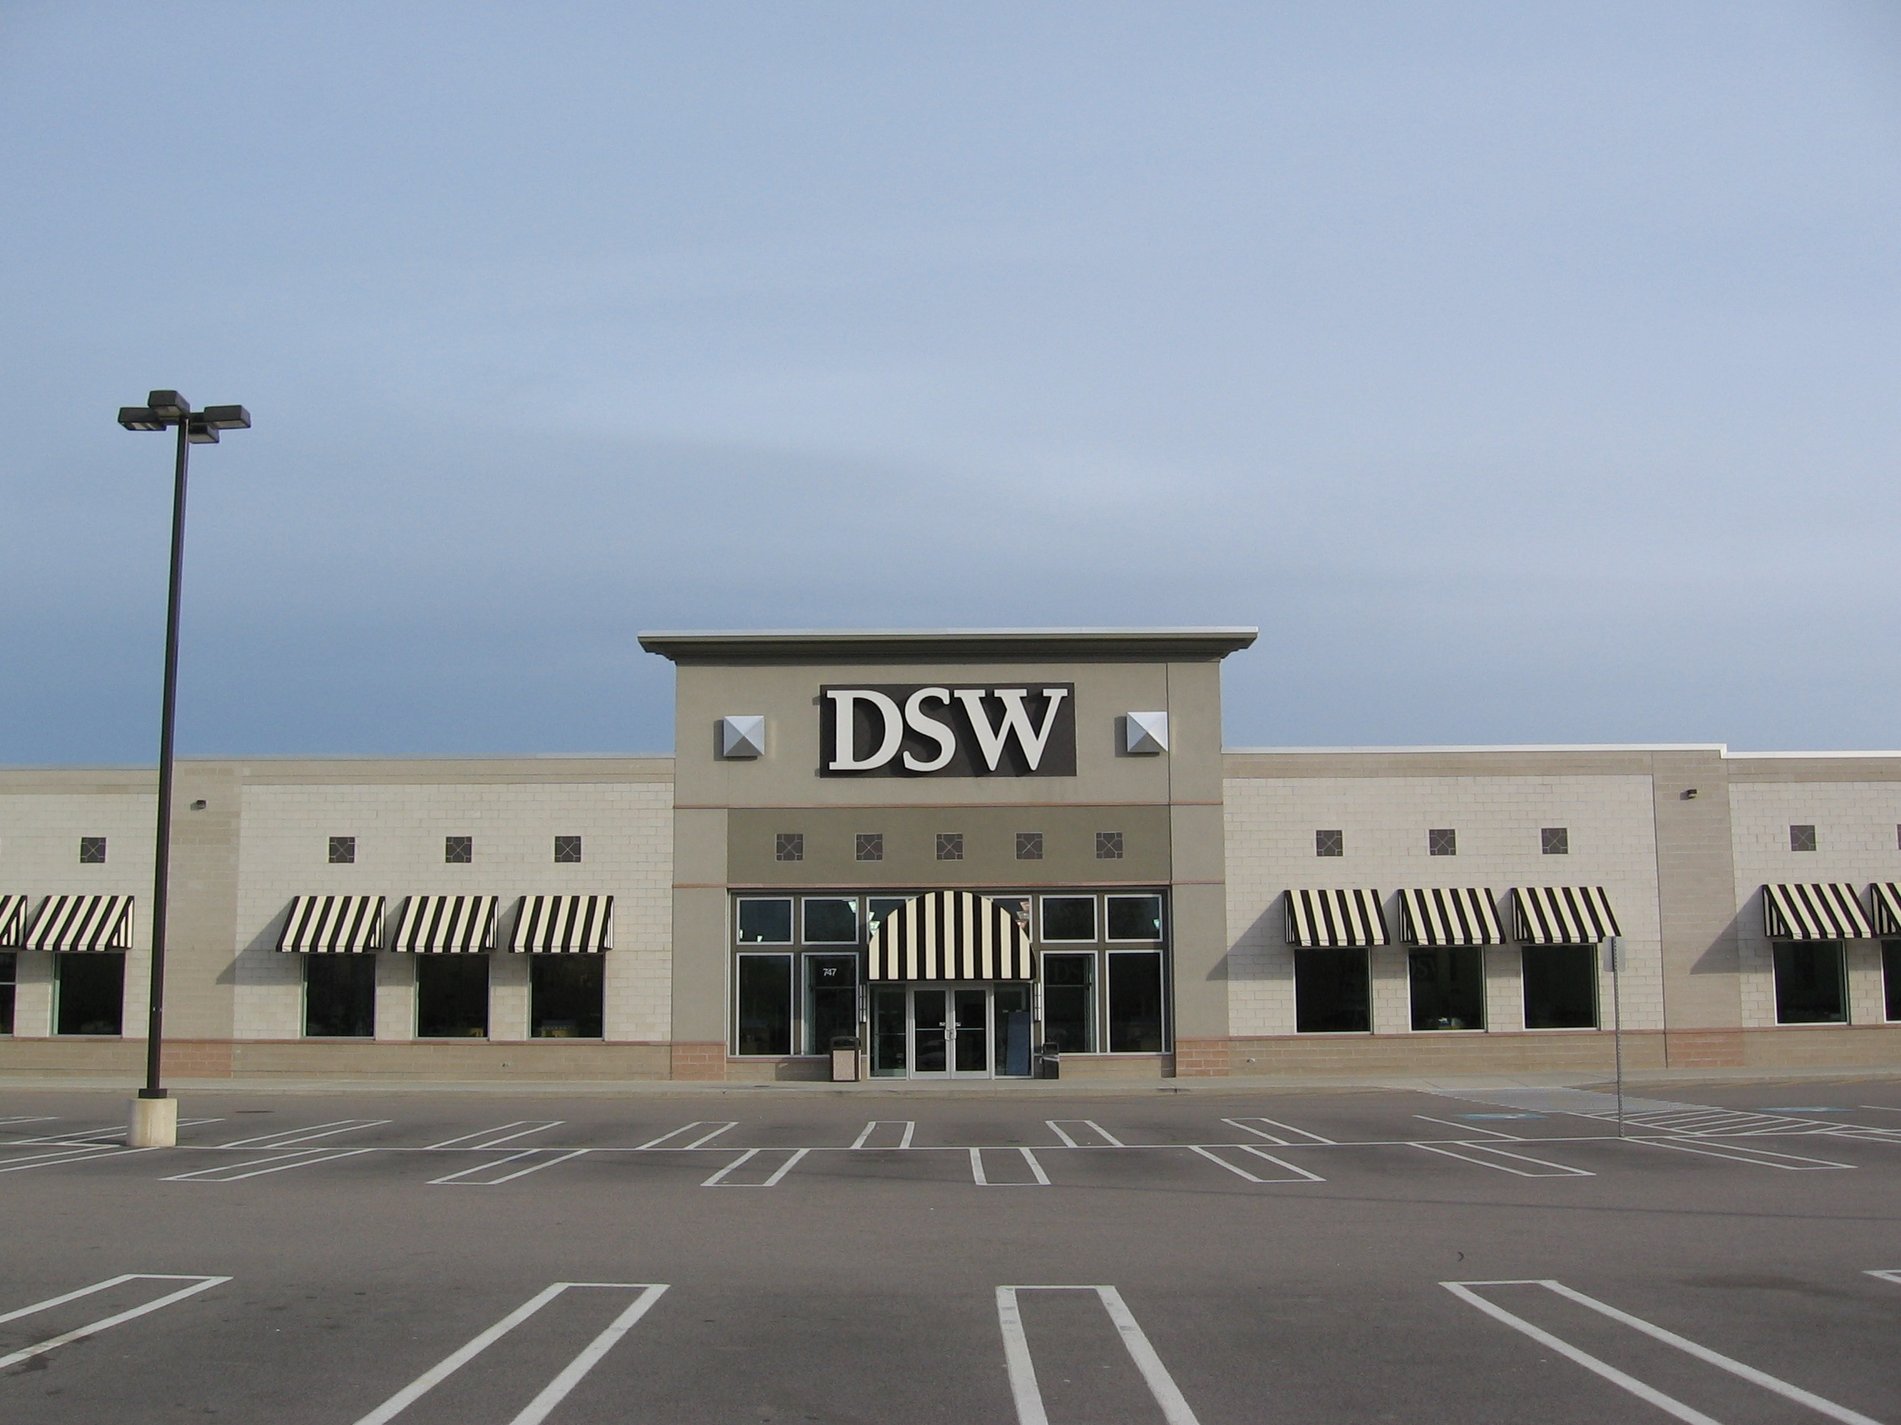 directions to dsw shoes